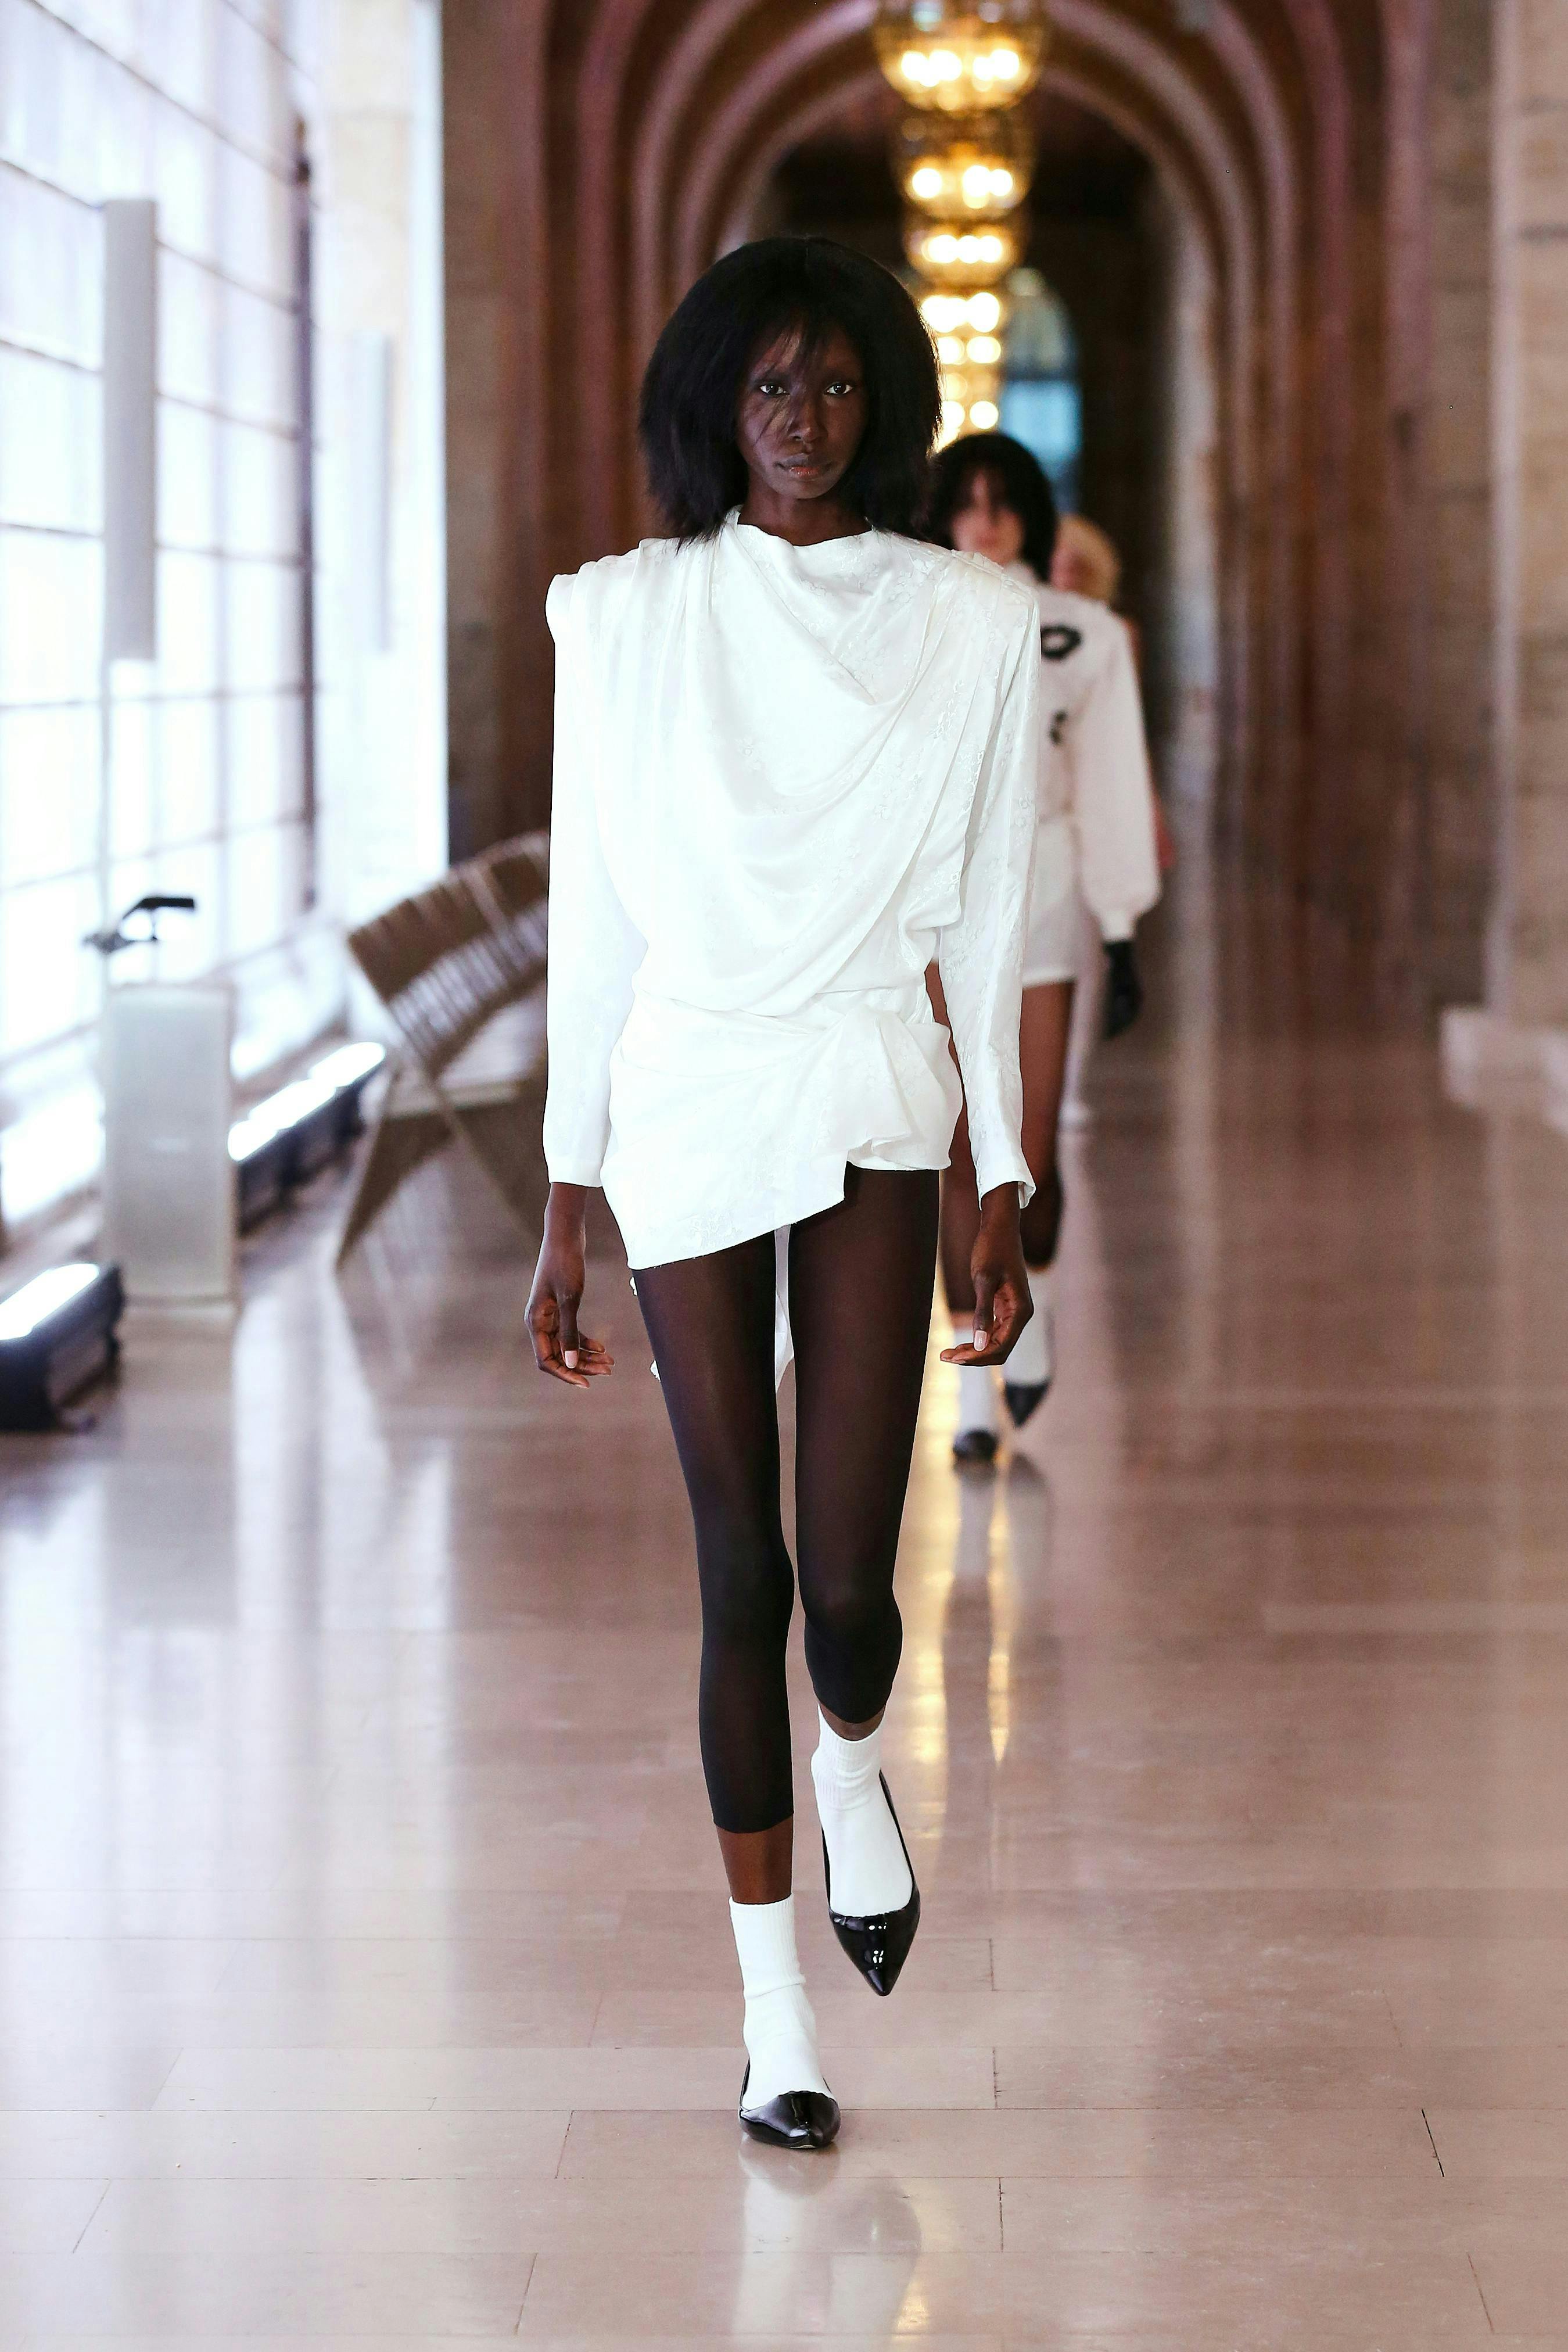 A model in a white blouse and shorts, black tights, white socks, and black flats.